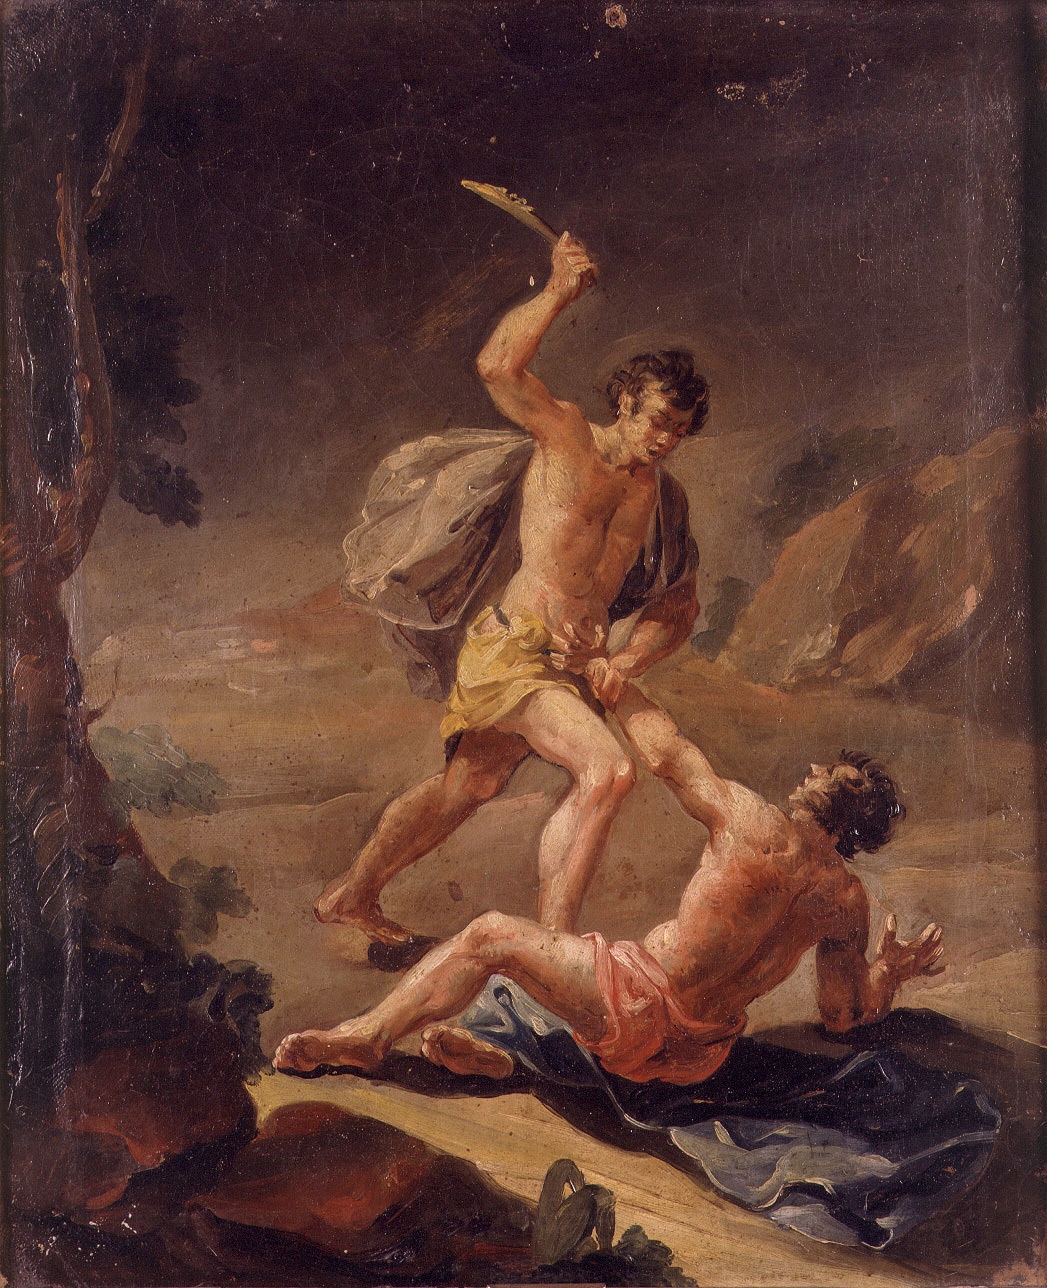 parents of cain and abel